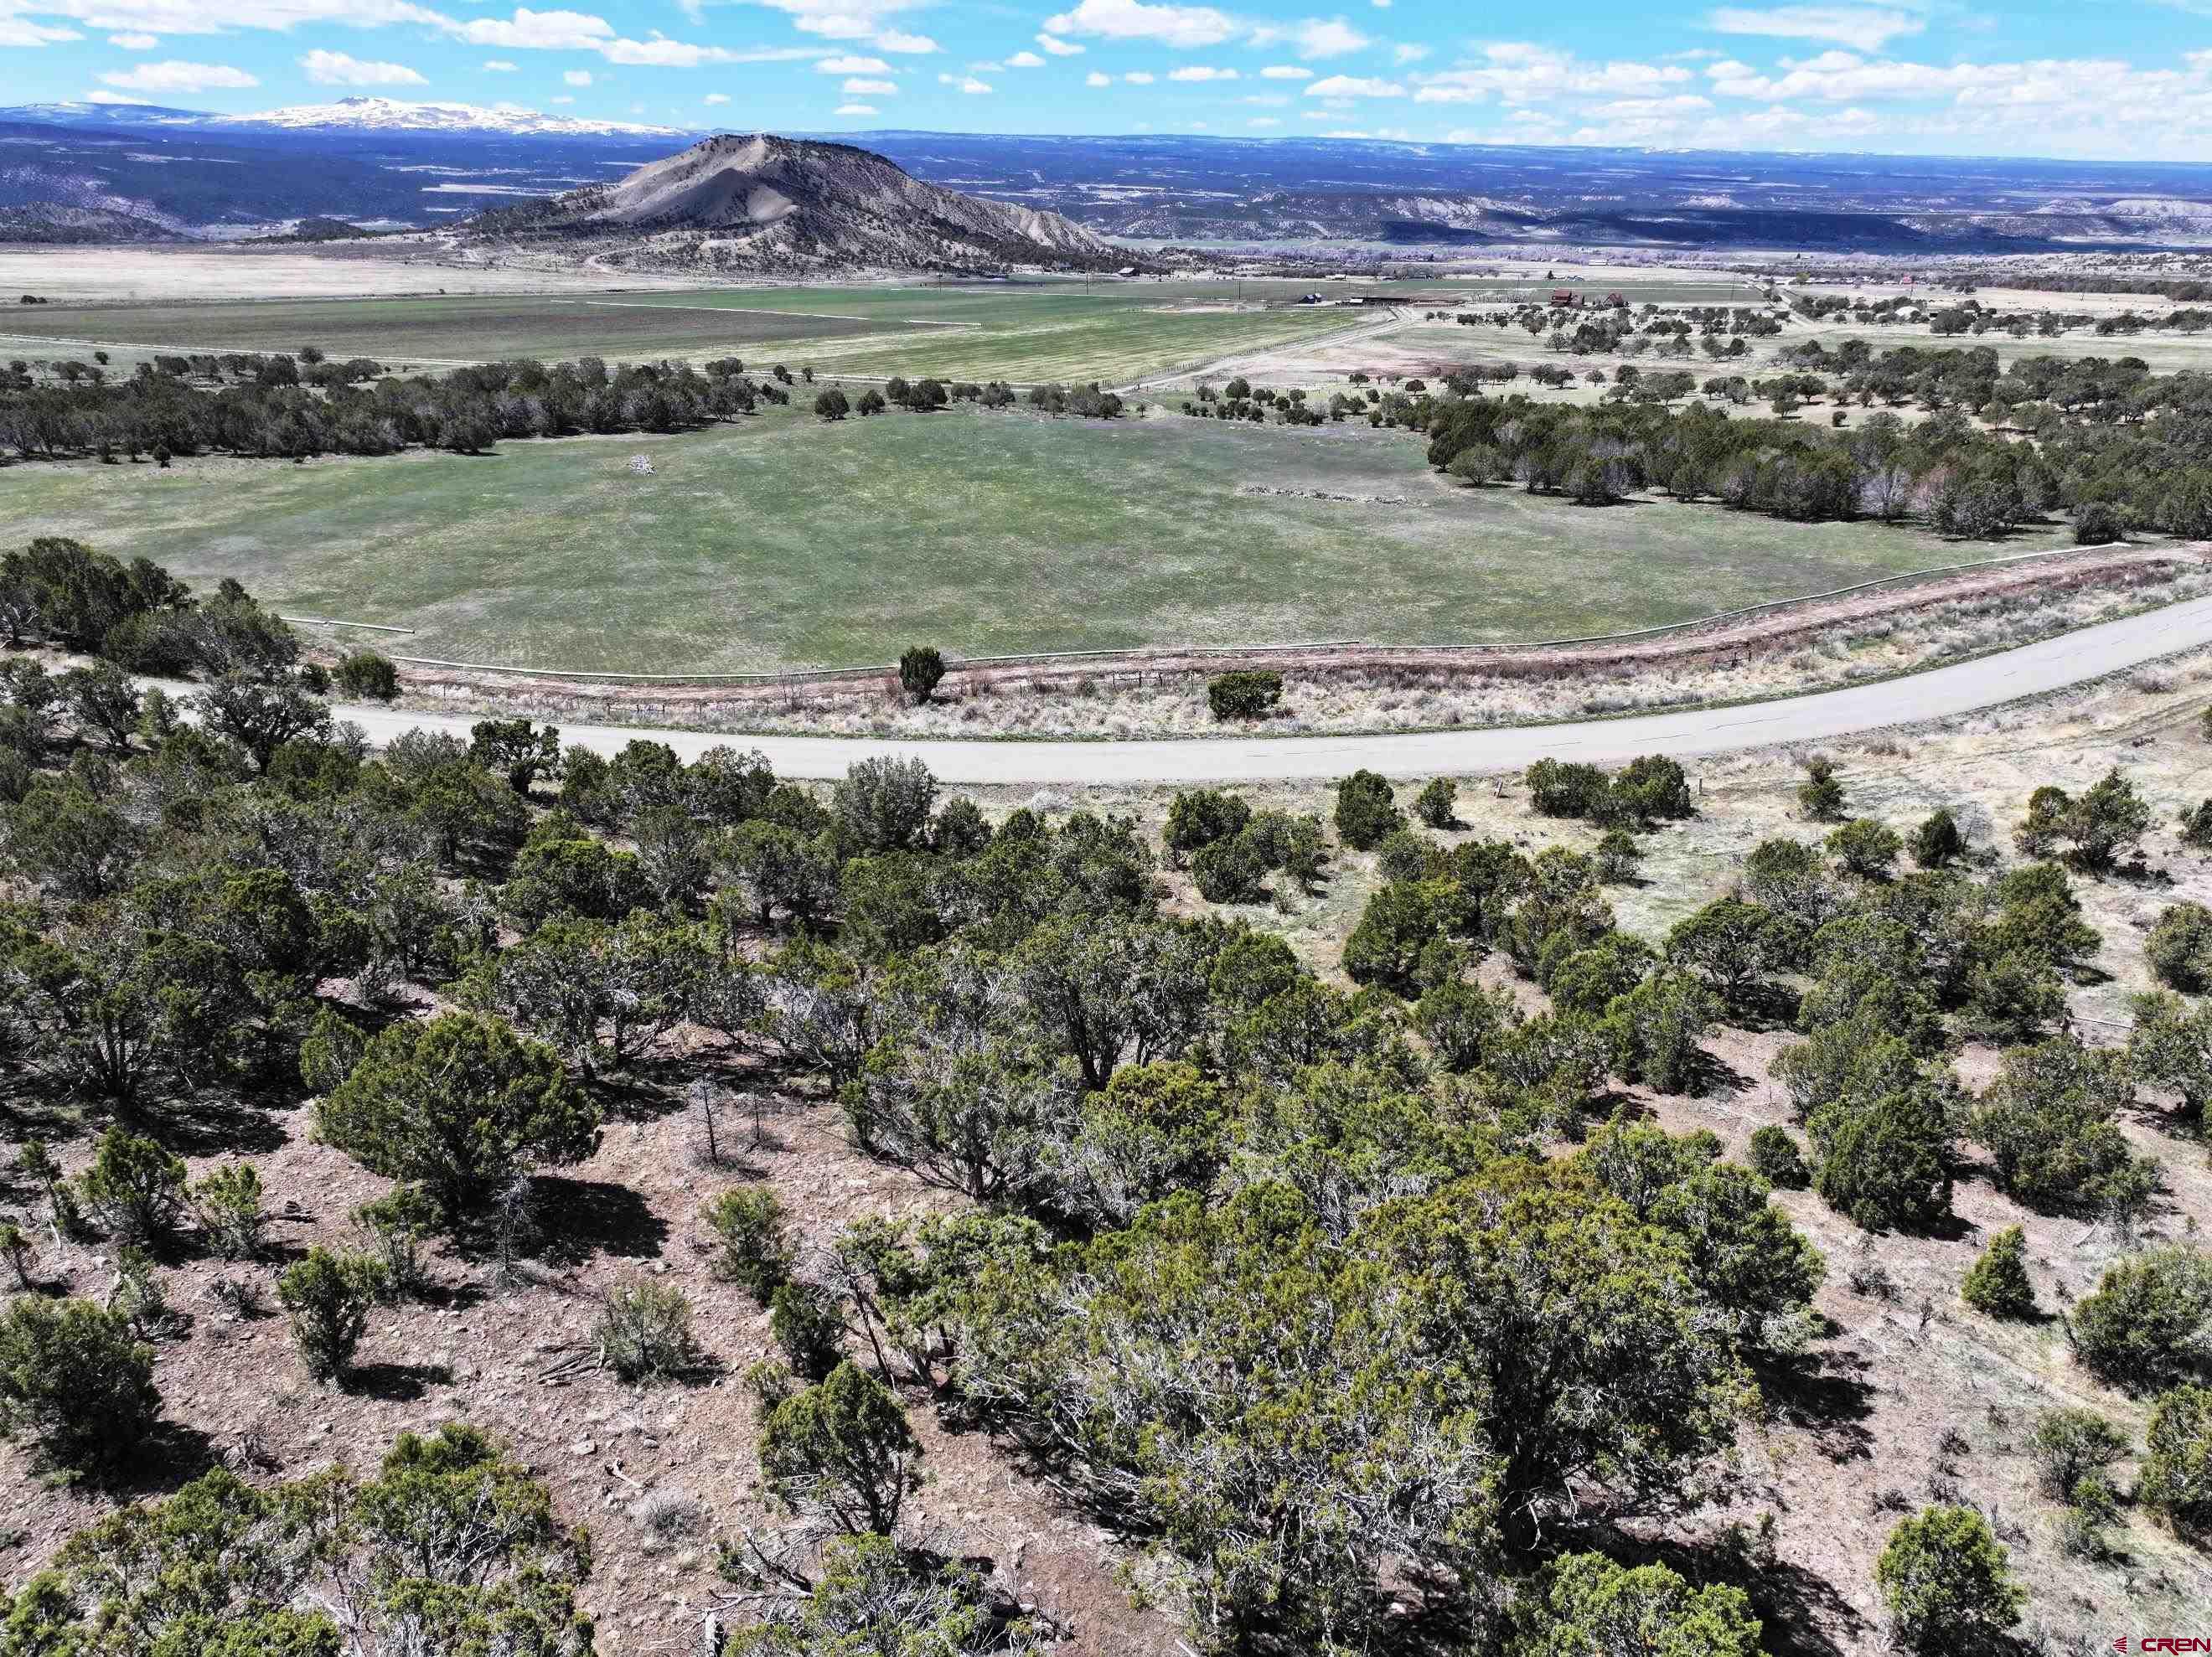 Photo of Tbd (Lot 10) 7250 Rd in Montrose, CO